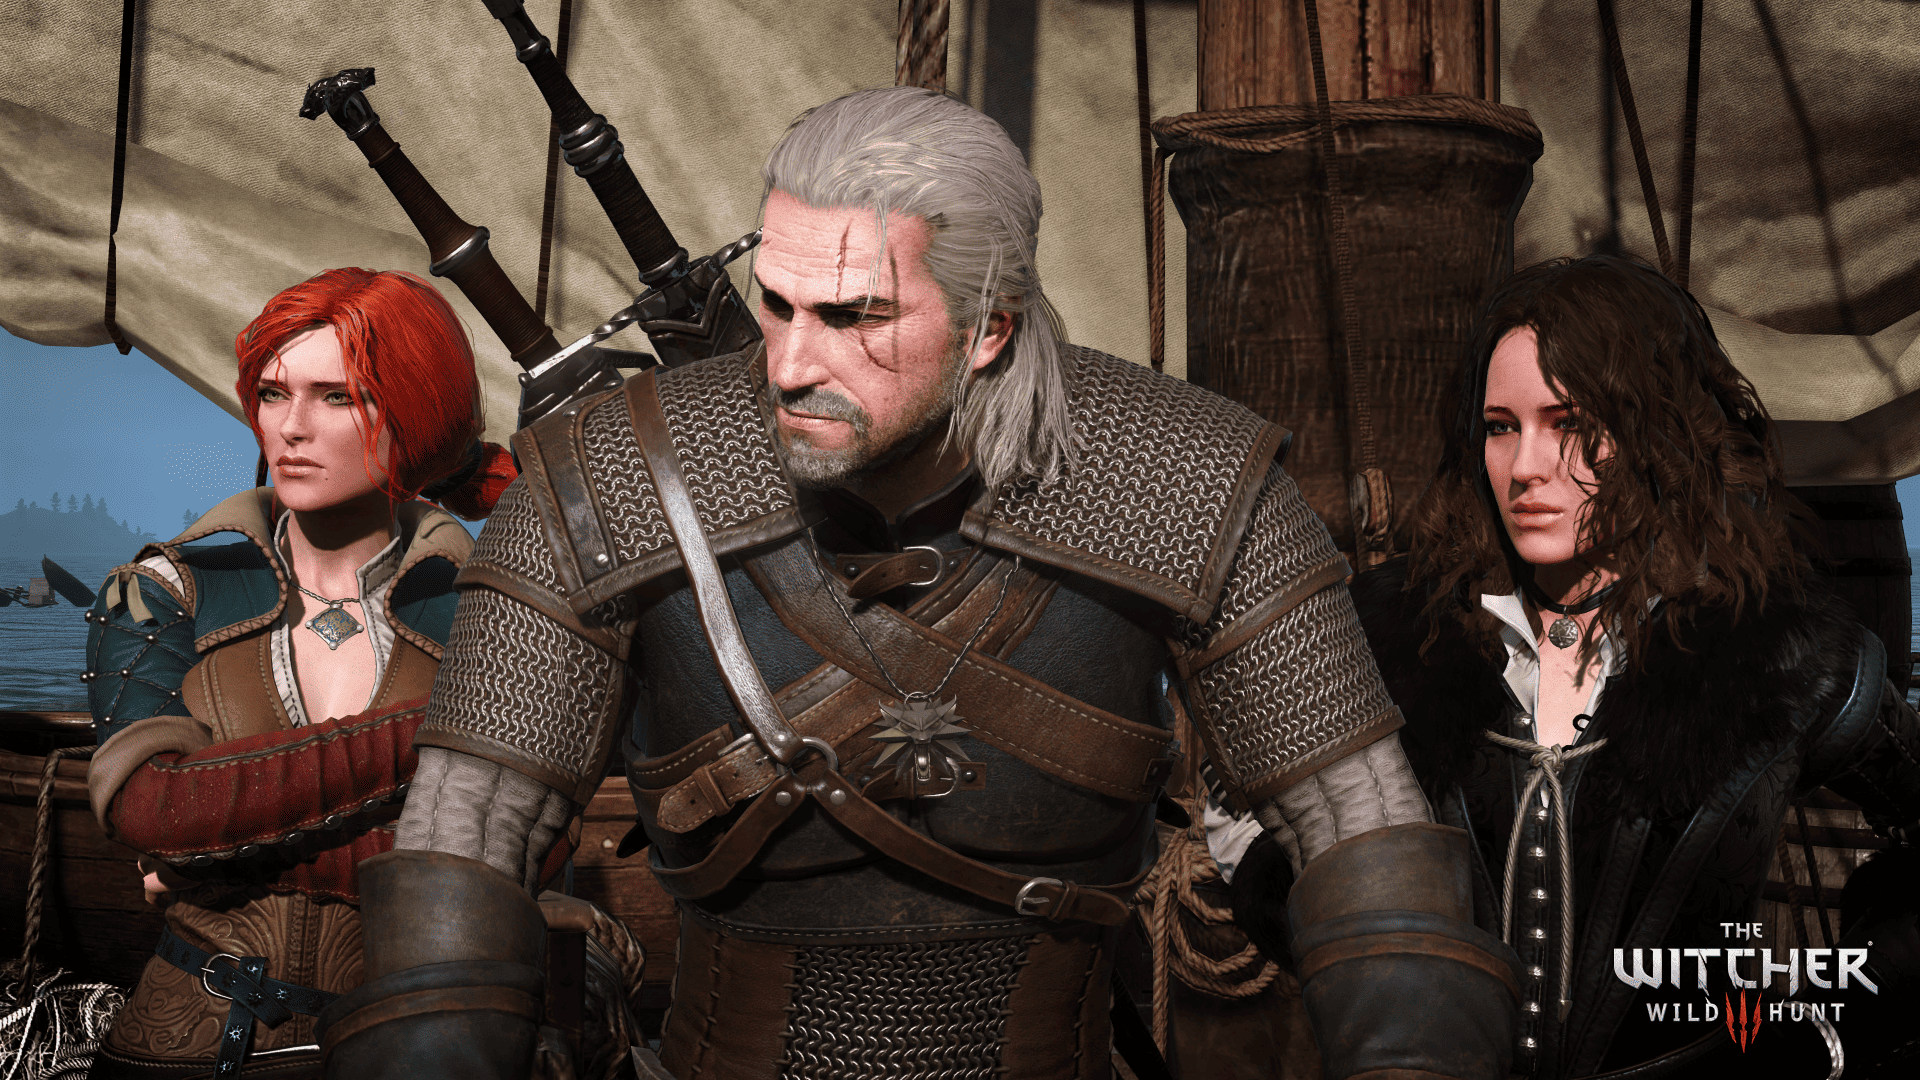 A CD Projekt Red promotional image for The Witcher 3: Wild Hunt.